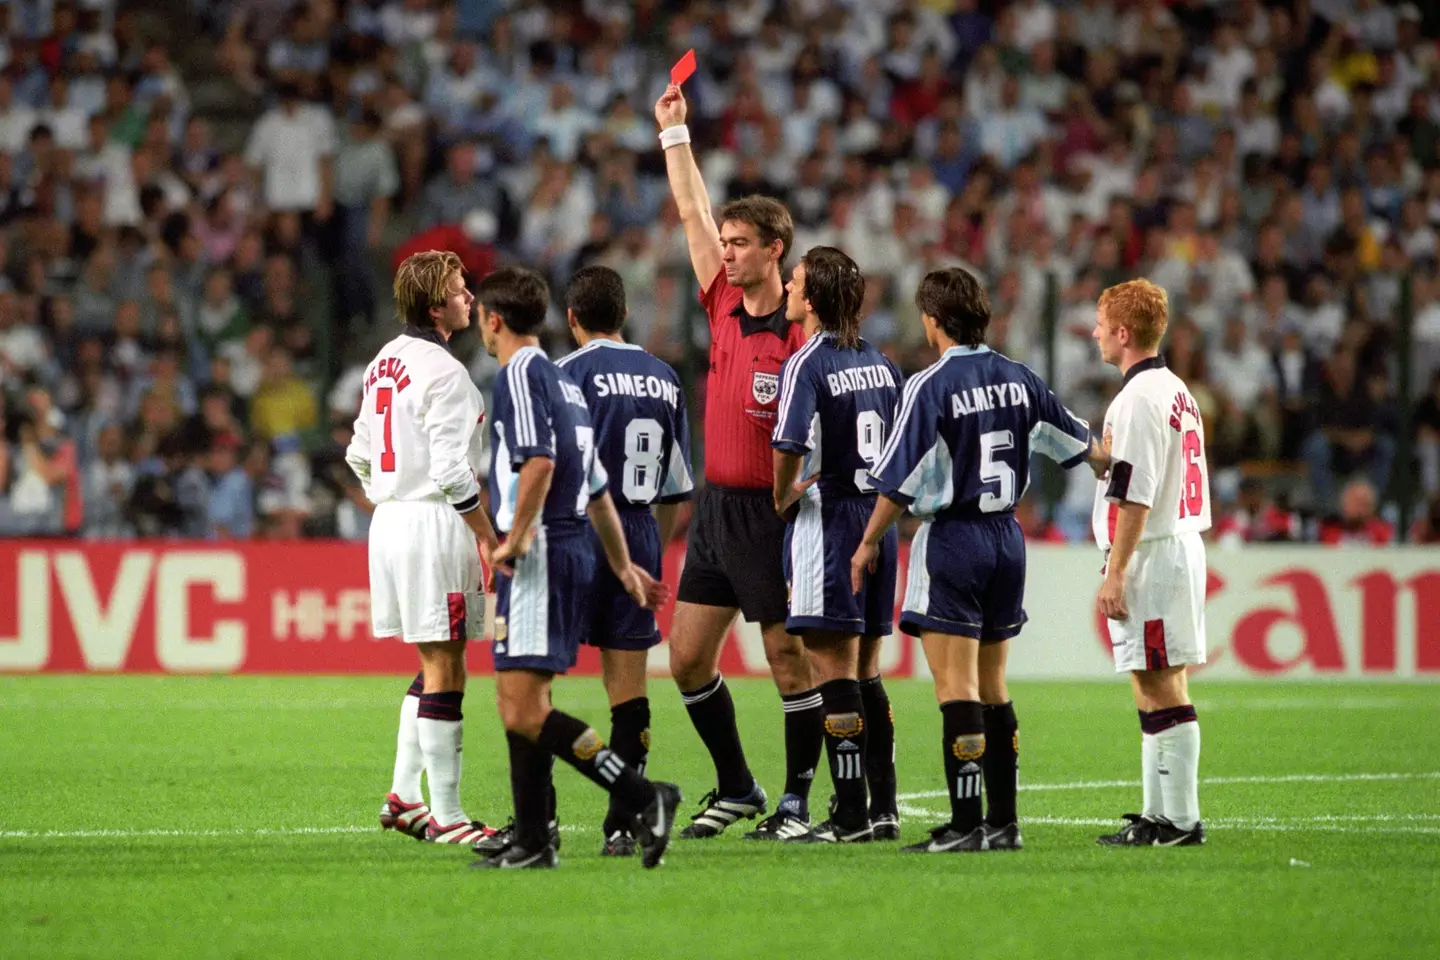 David Beckham is sent off against Argentina in the 1998 World Cup round-of-16 fixture against Argentina. (Alamy)